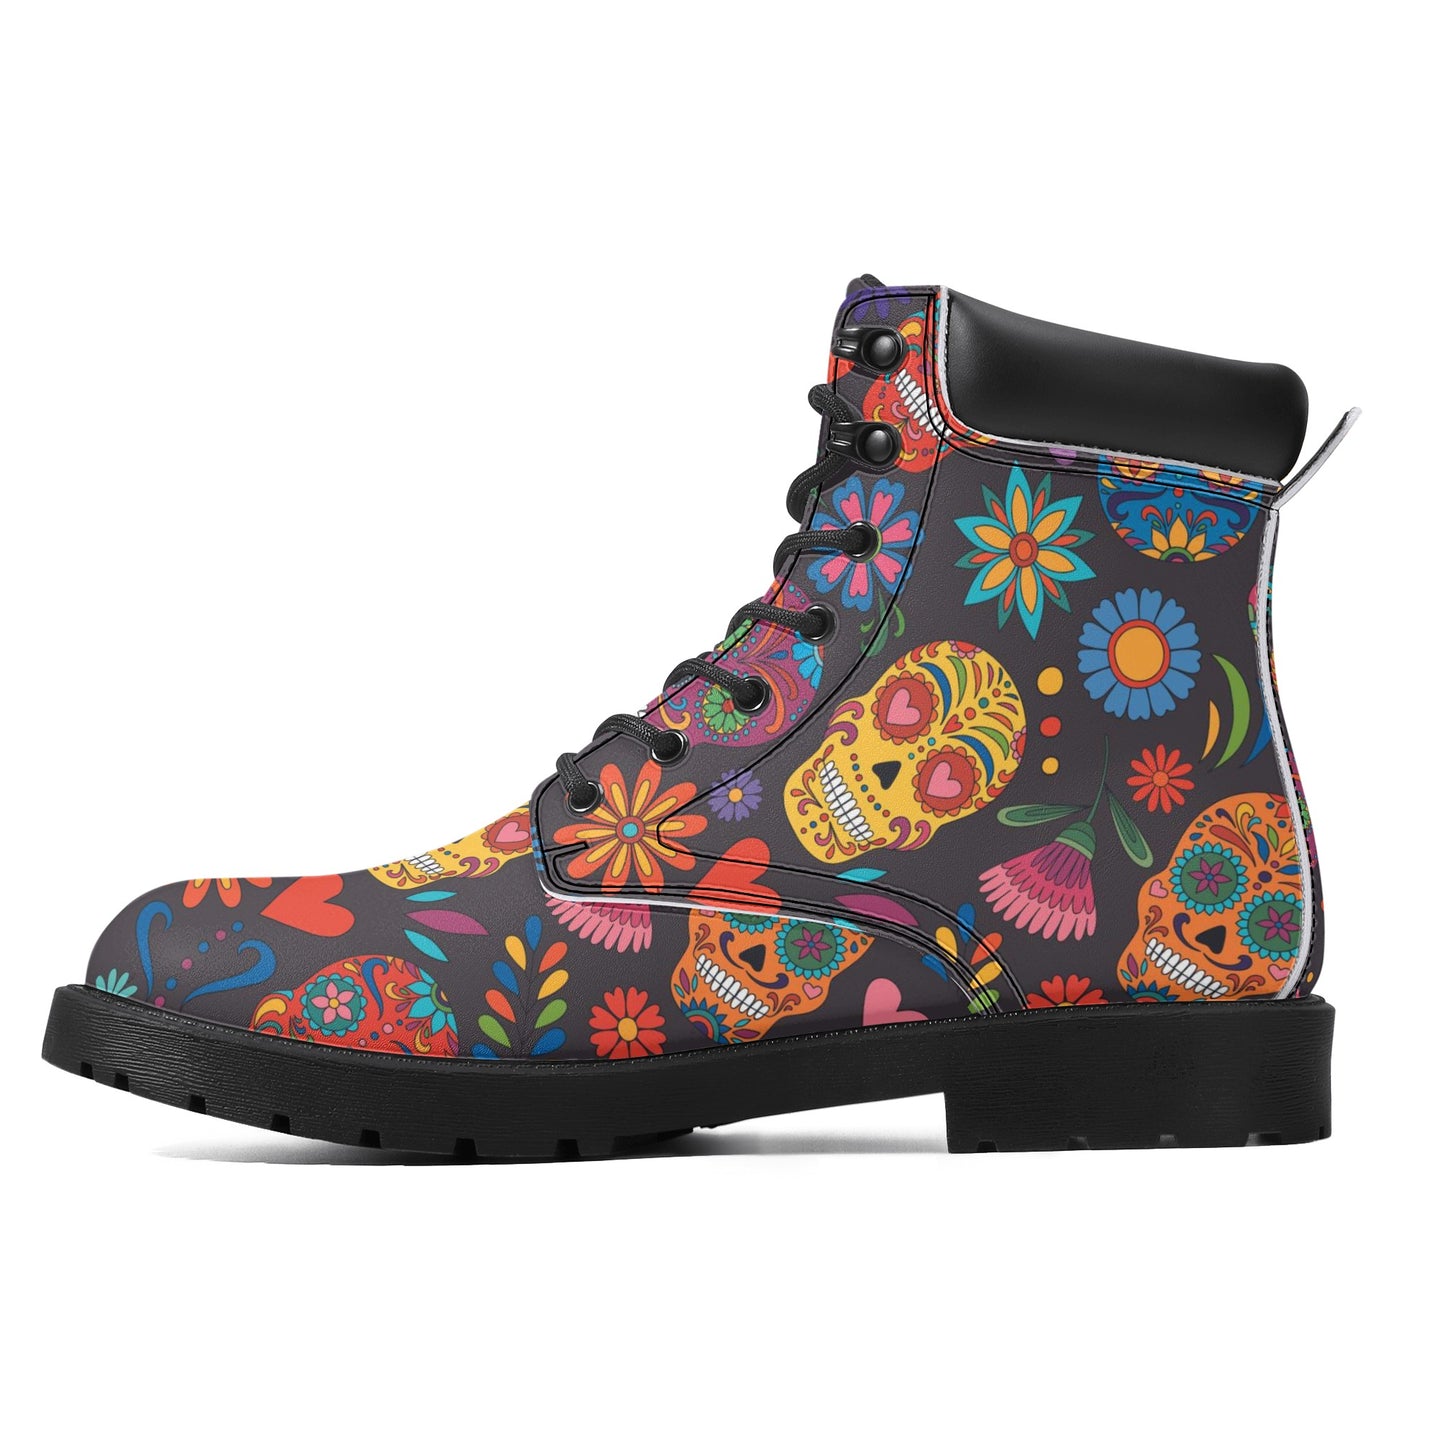 Floral skull Women's All Season Leather Boots